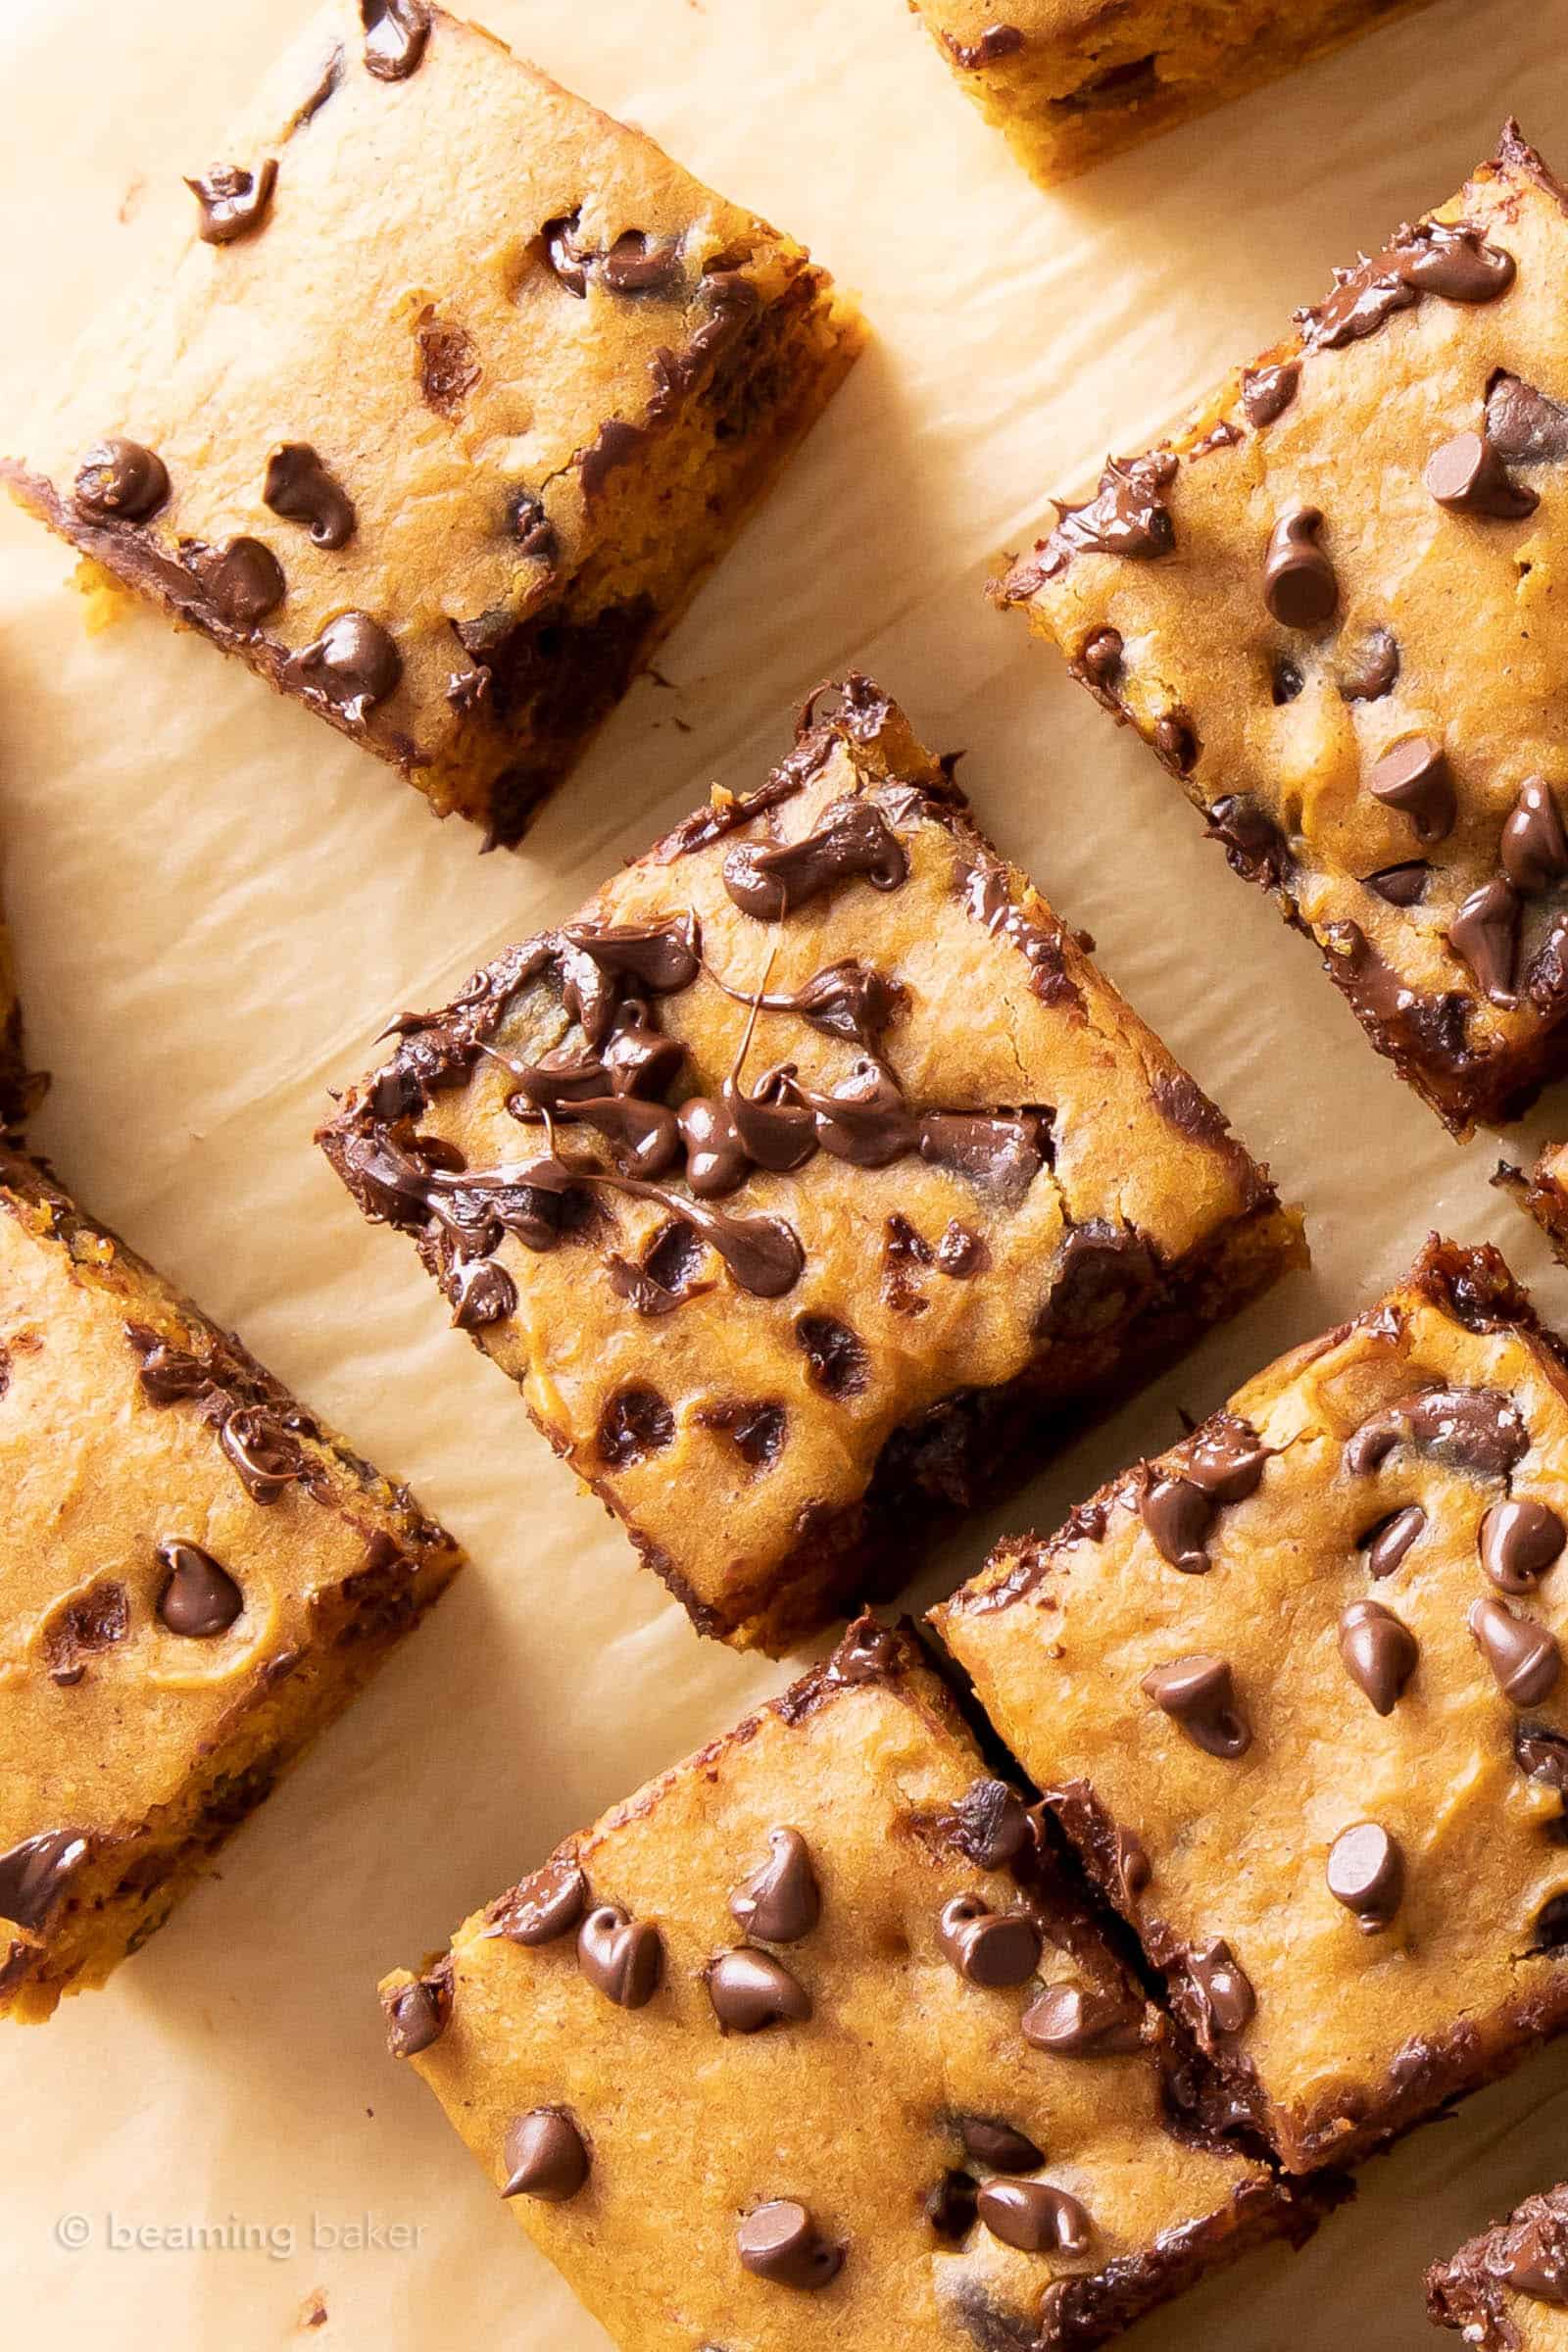 Melty chocolate chips adorn fresh-baked pumpkin bars on brown parchment paper